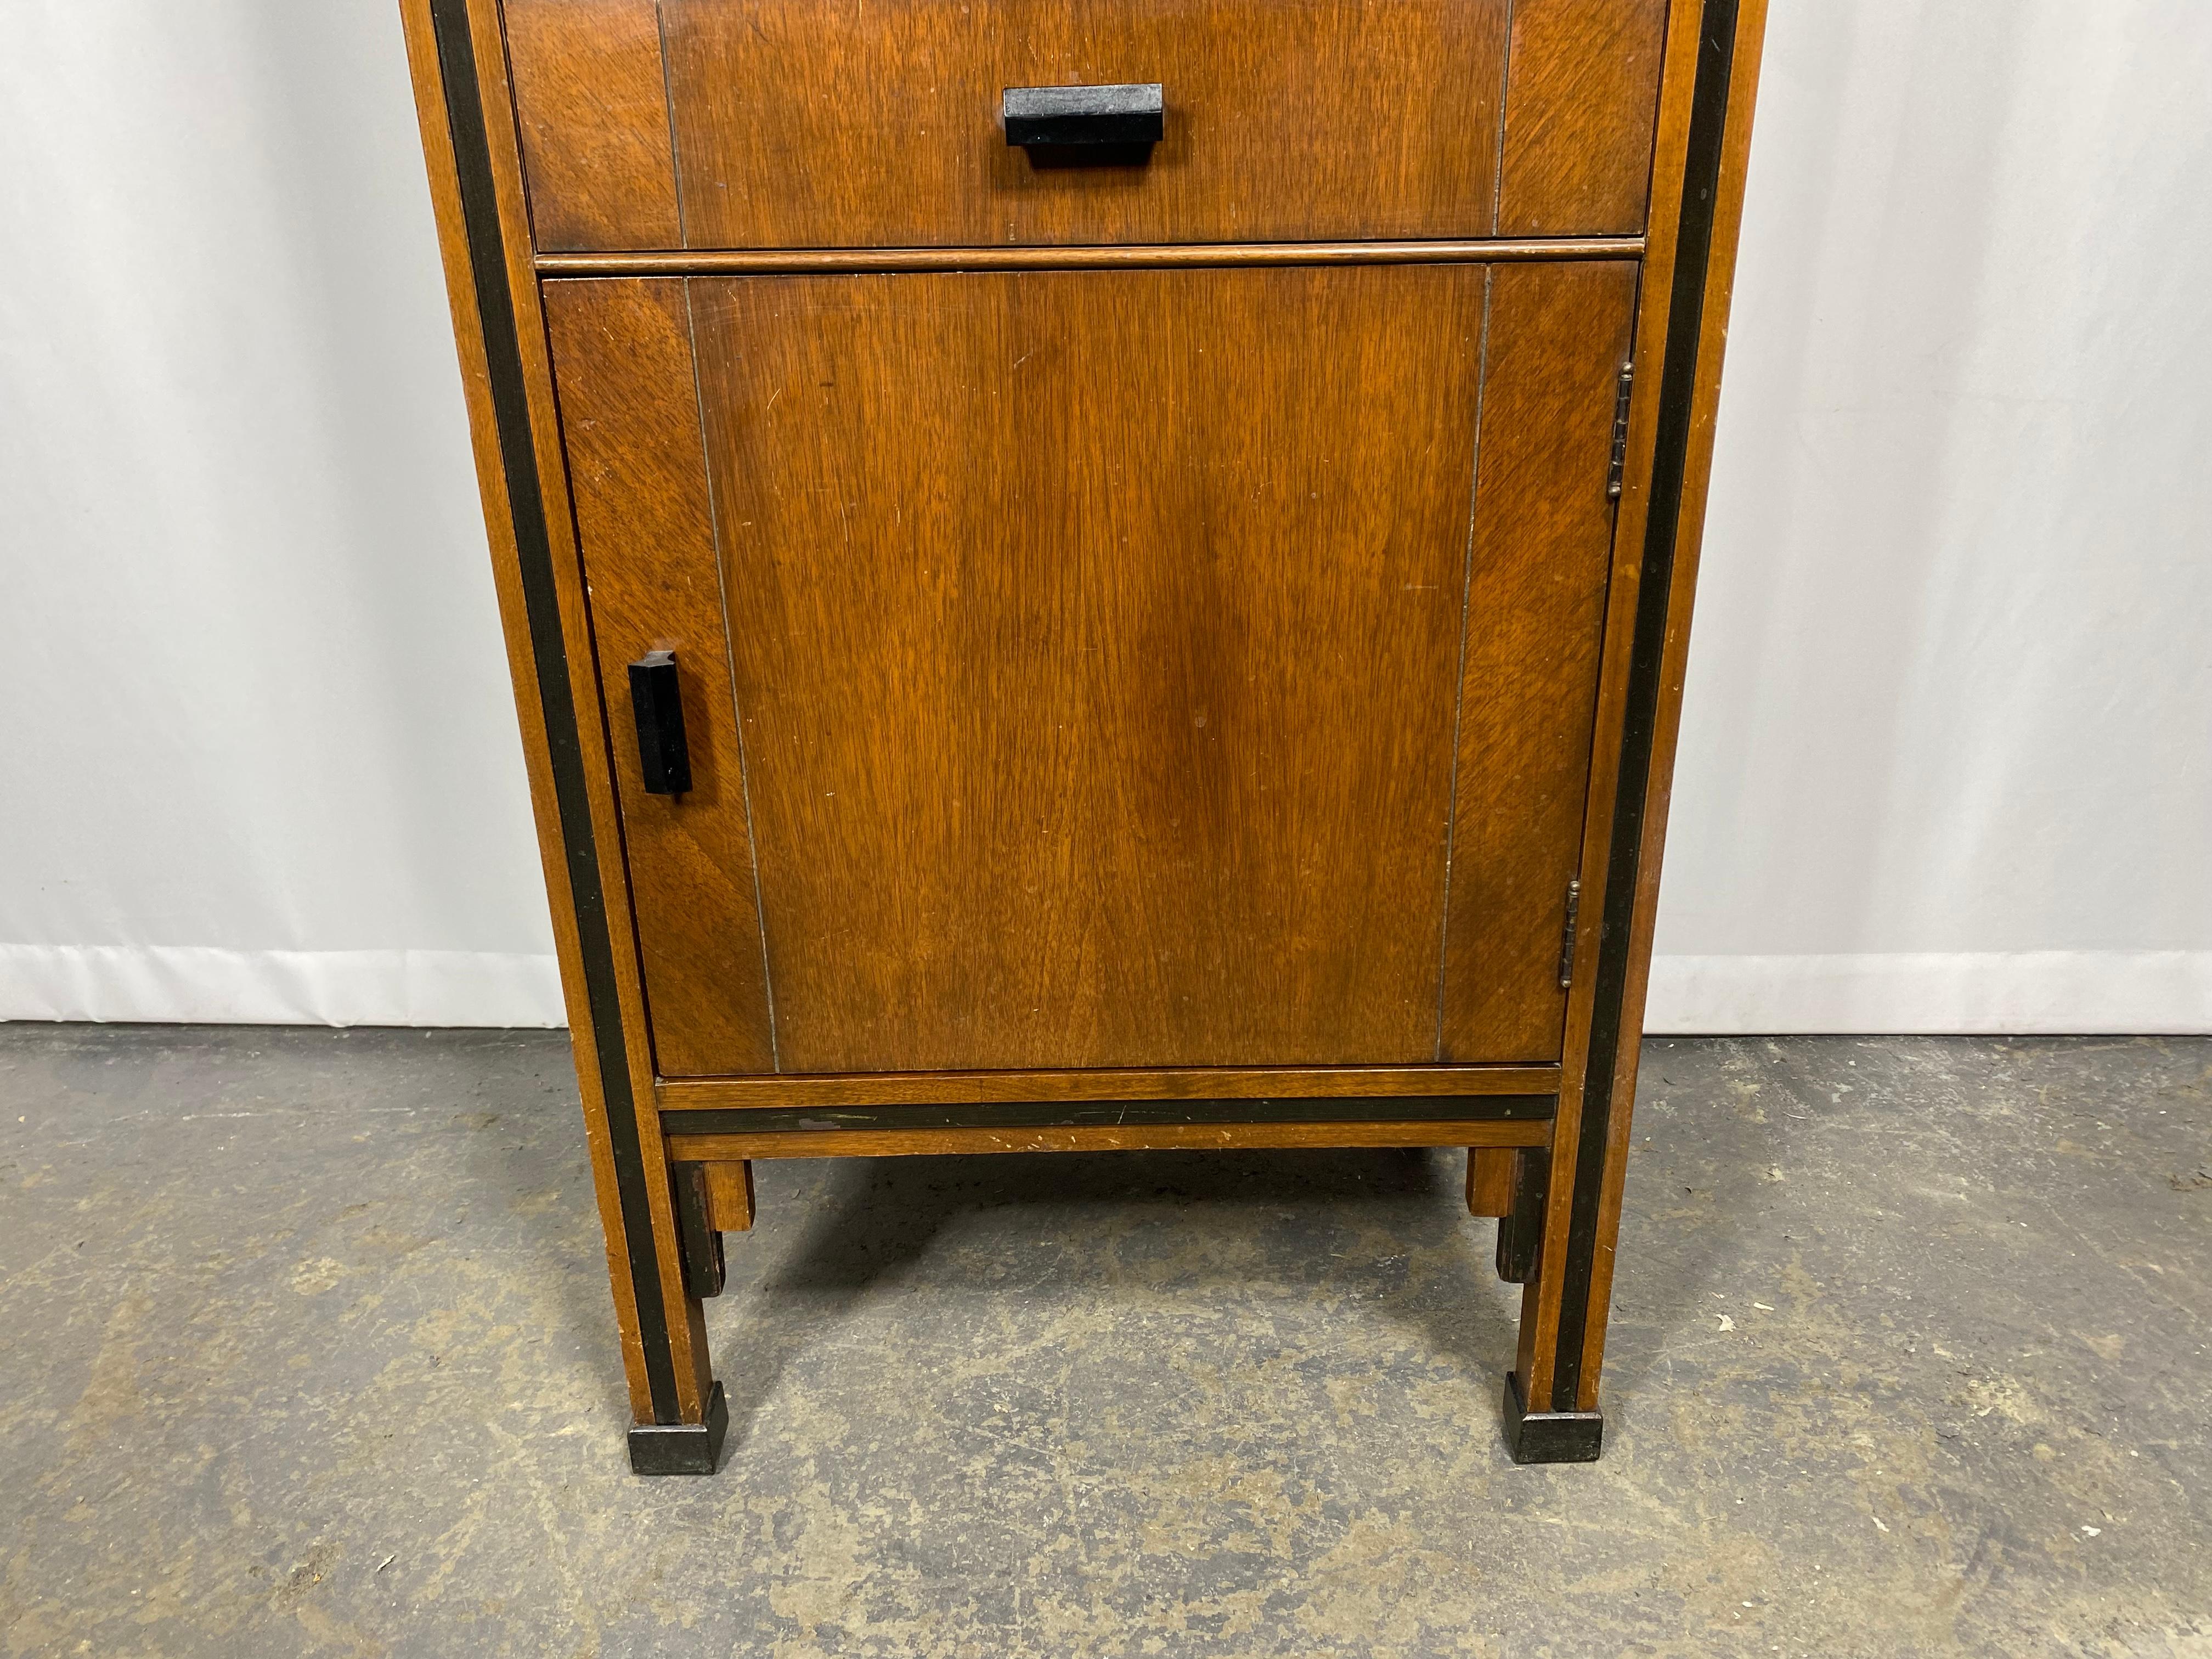 Elegant Art Deco Dental cabinet, walnut and glass, manufactured by ENOCHS For Sale 4